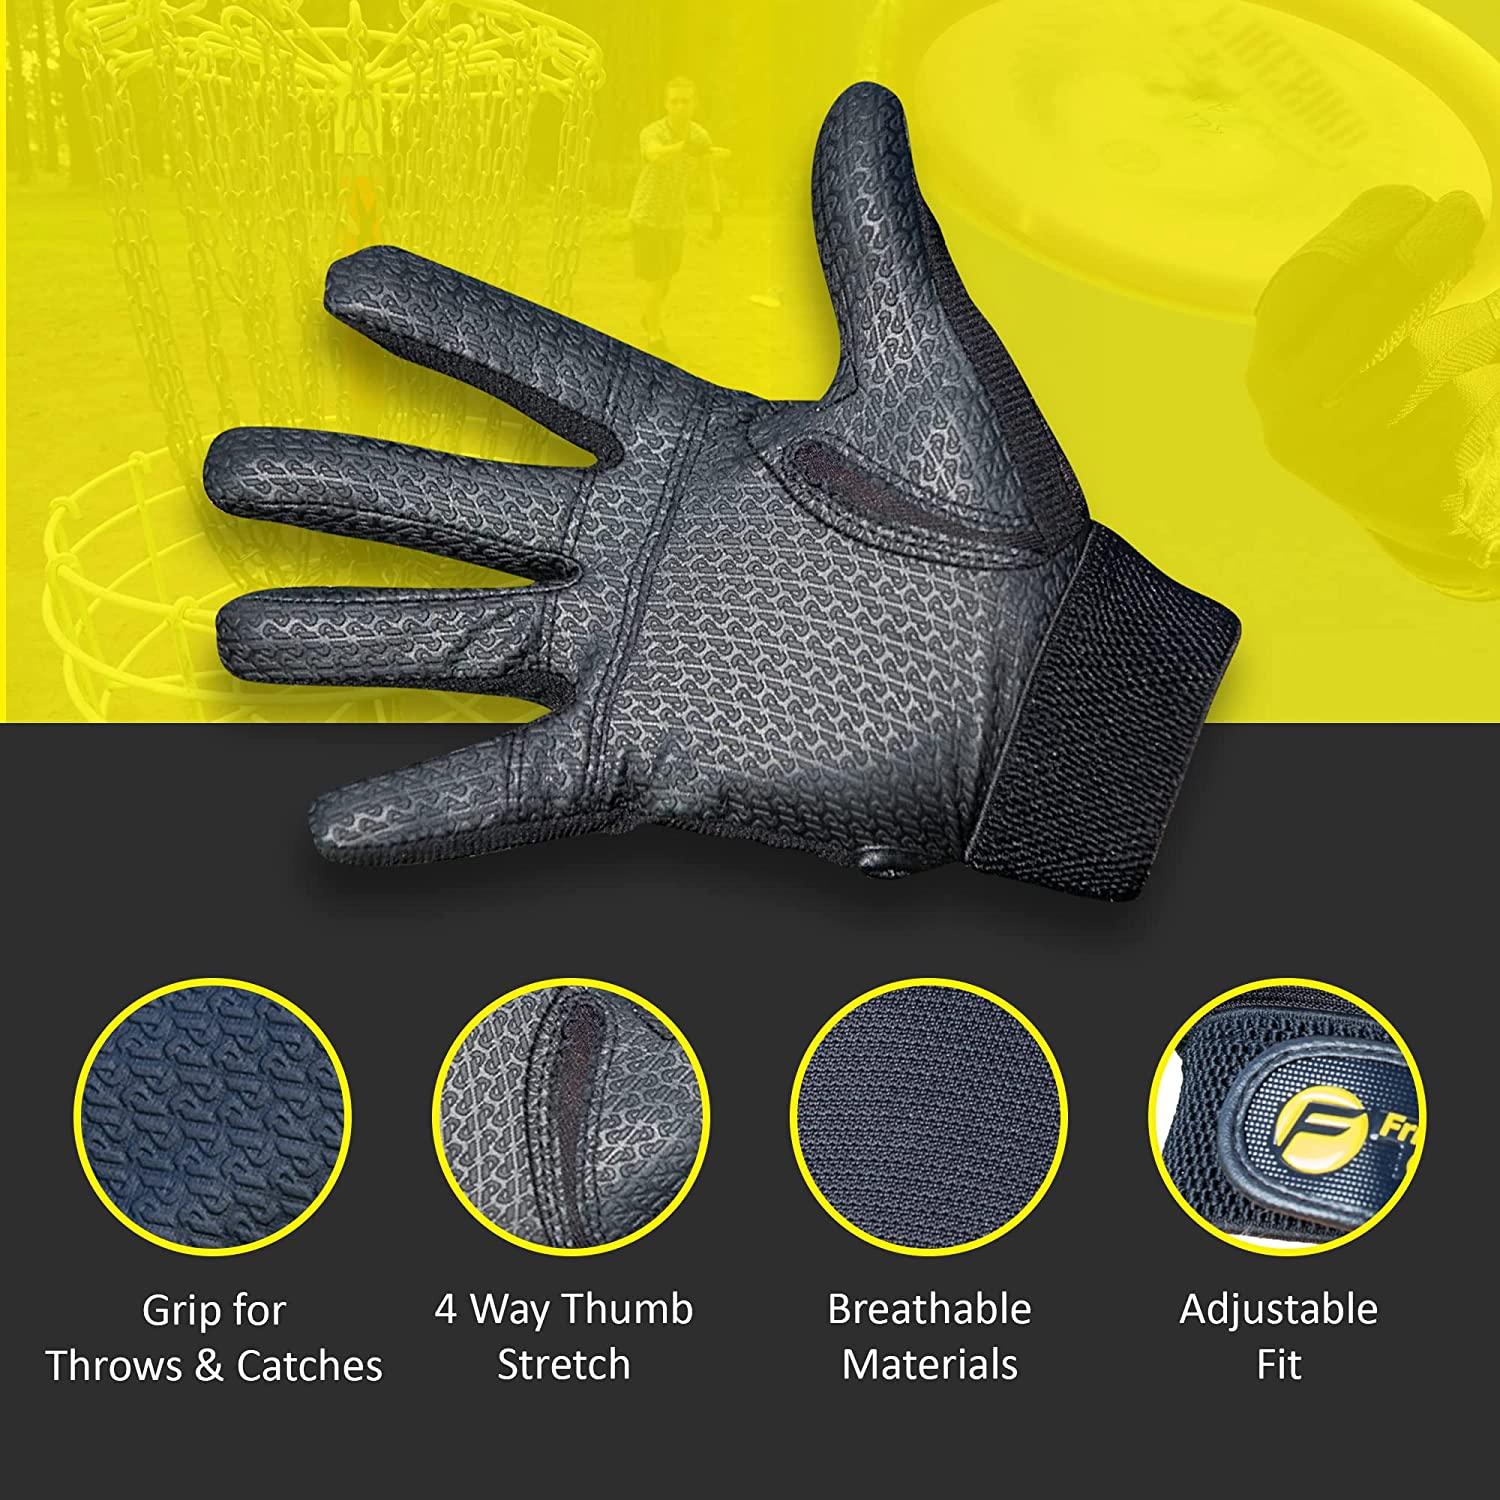 Friction 3 Ultimate Frisbee Gloves (pair) - Small Planet Disc Sports - New  Zealand